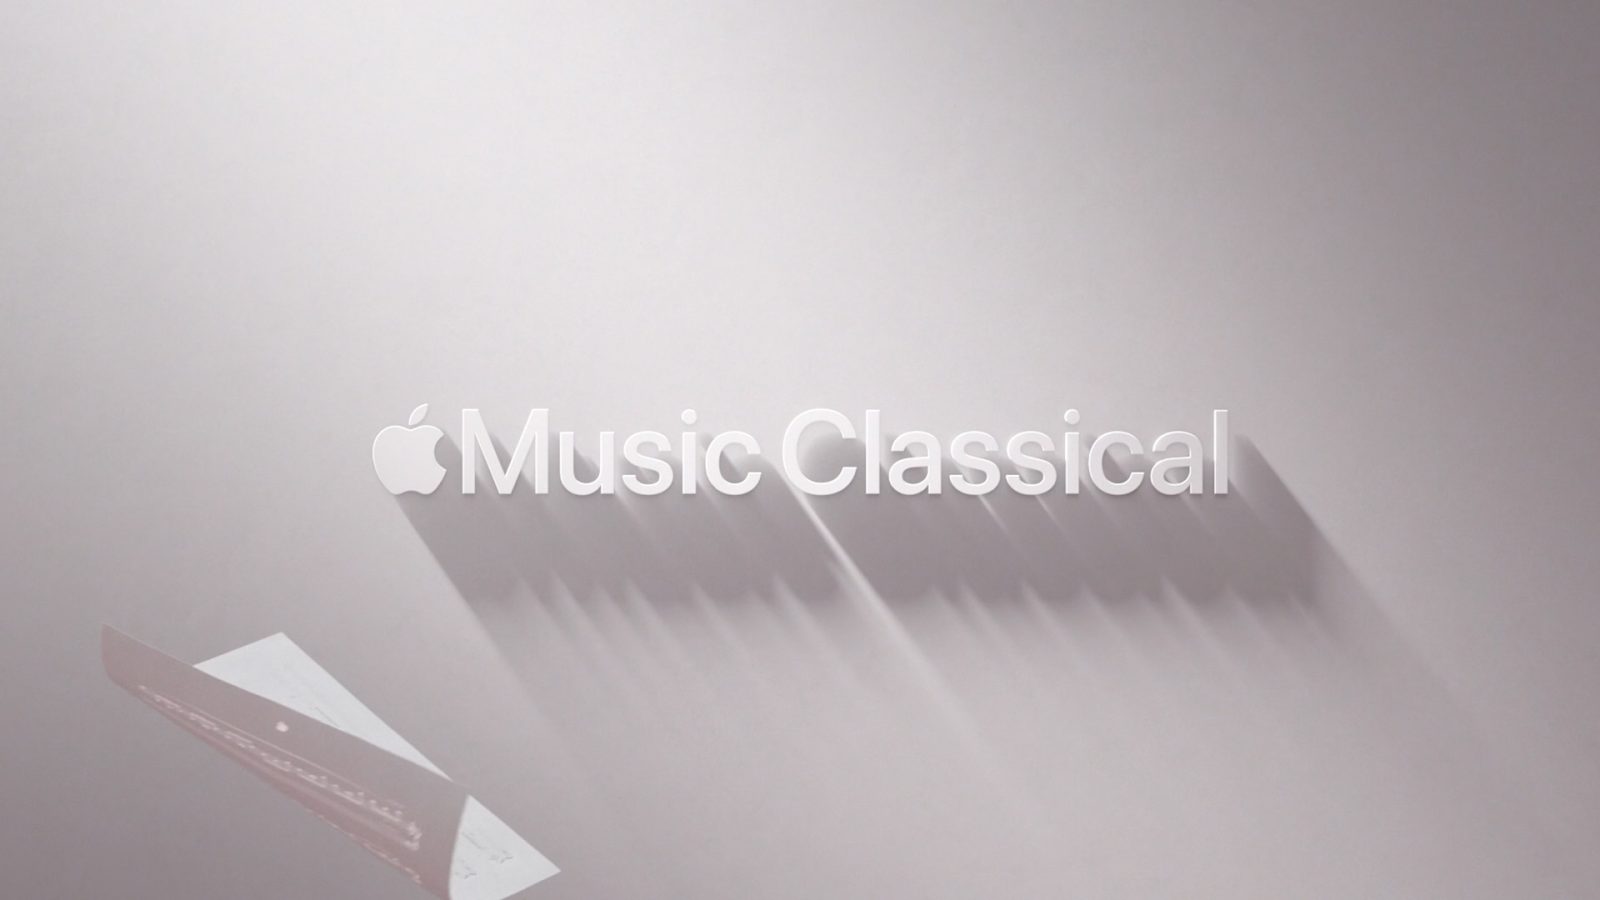 Apple Classical has what Apple Music needs: an app that isn't bundled with iOS